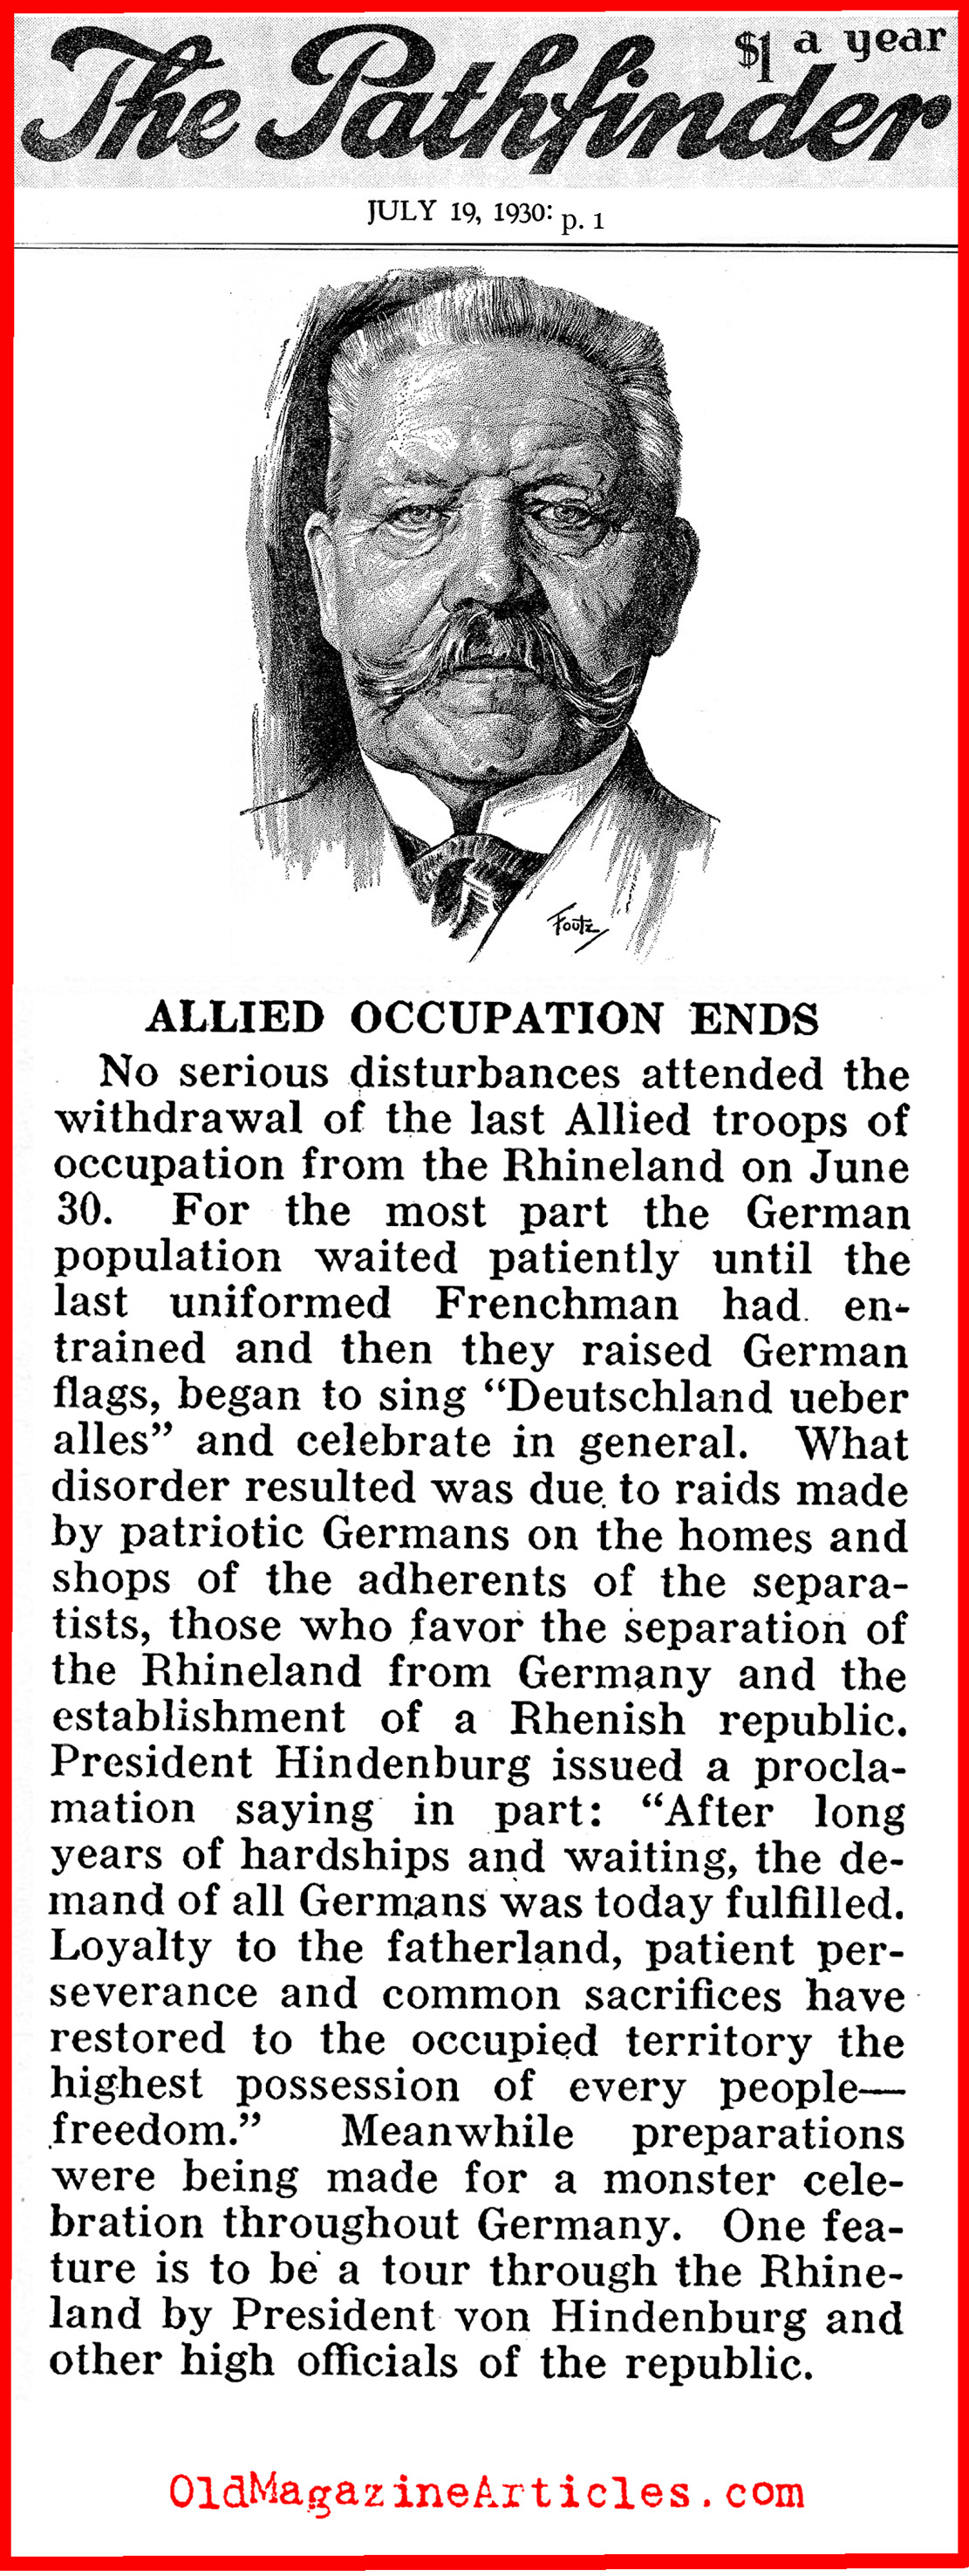 Allied Occupation of Germany Ends (The Pathfinder, 1930)